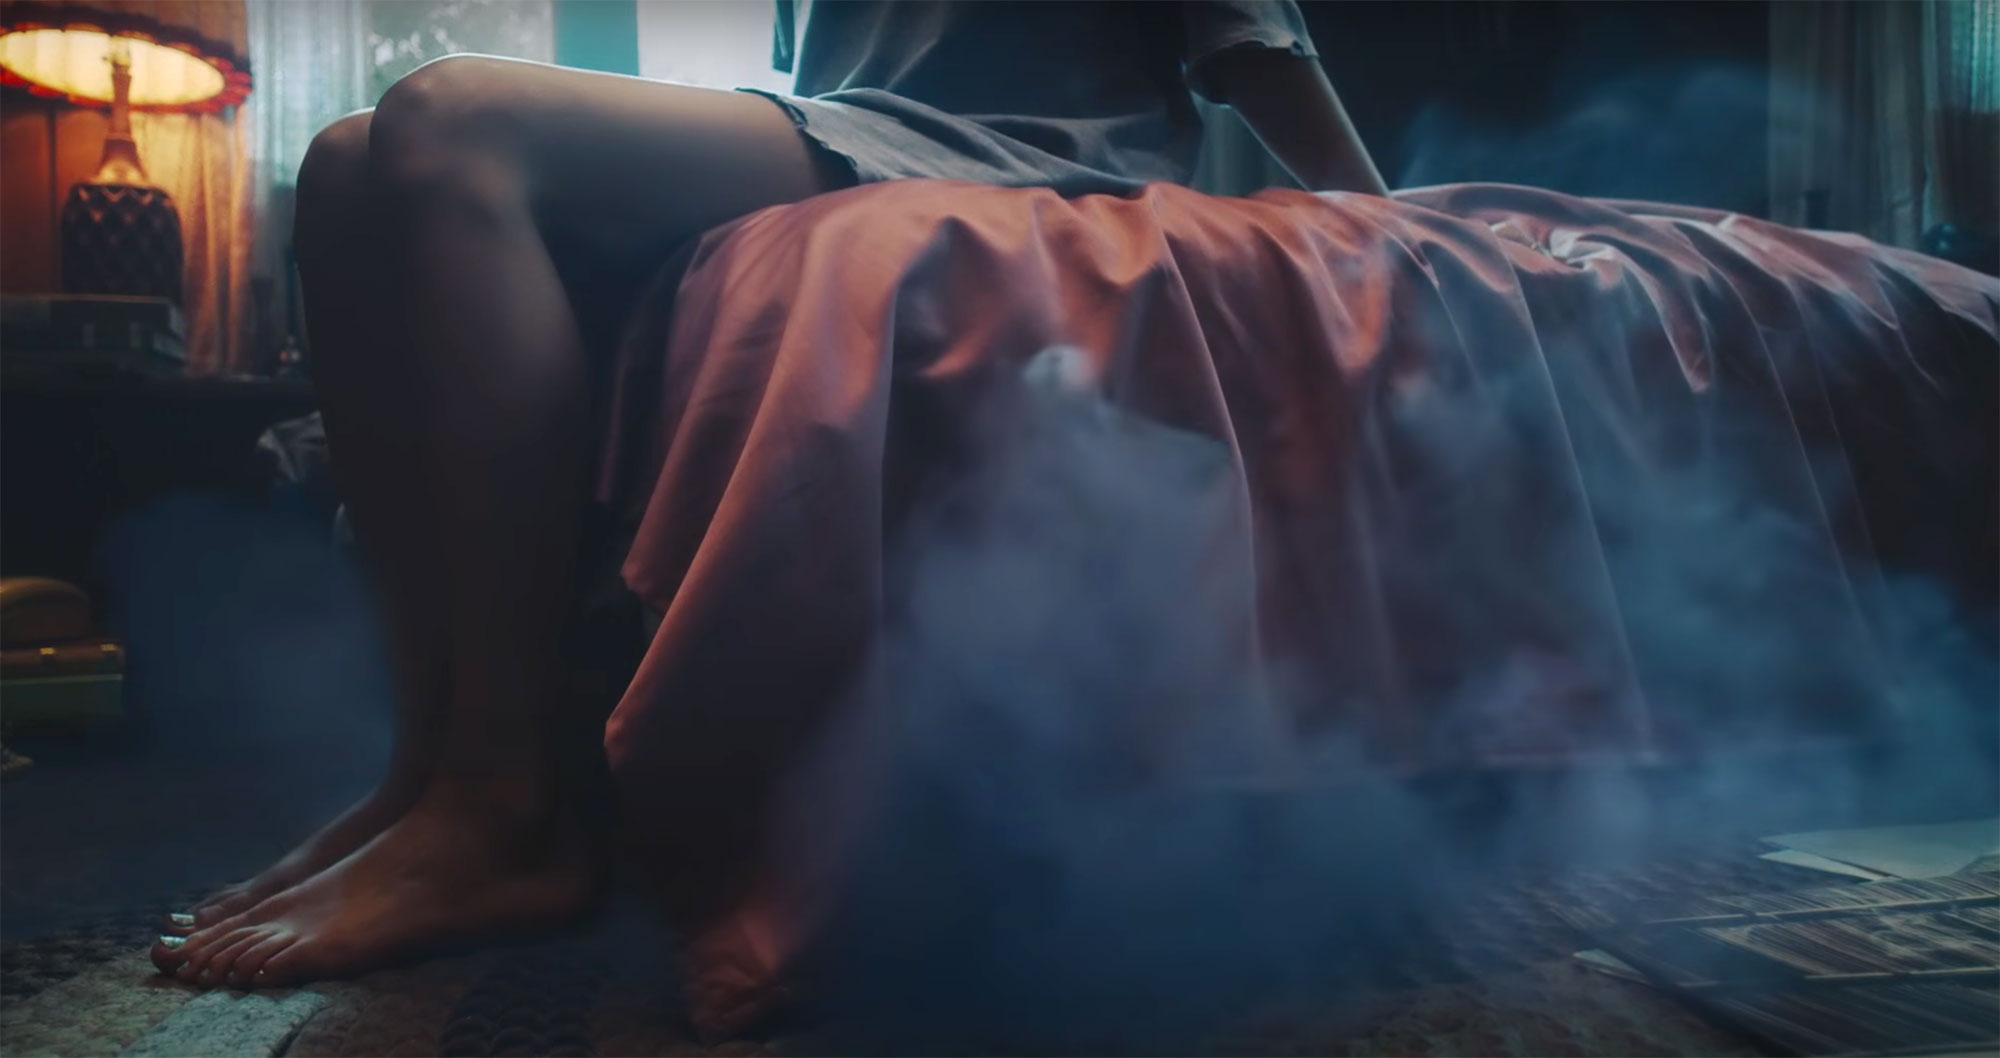 Taylor Swift's 'Lavender Haze': Details and Easter Eggs in Music Video